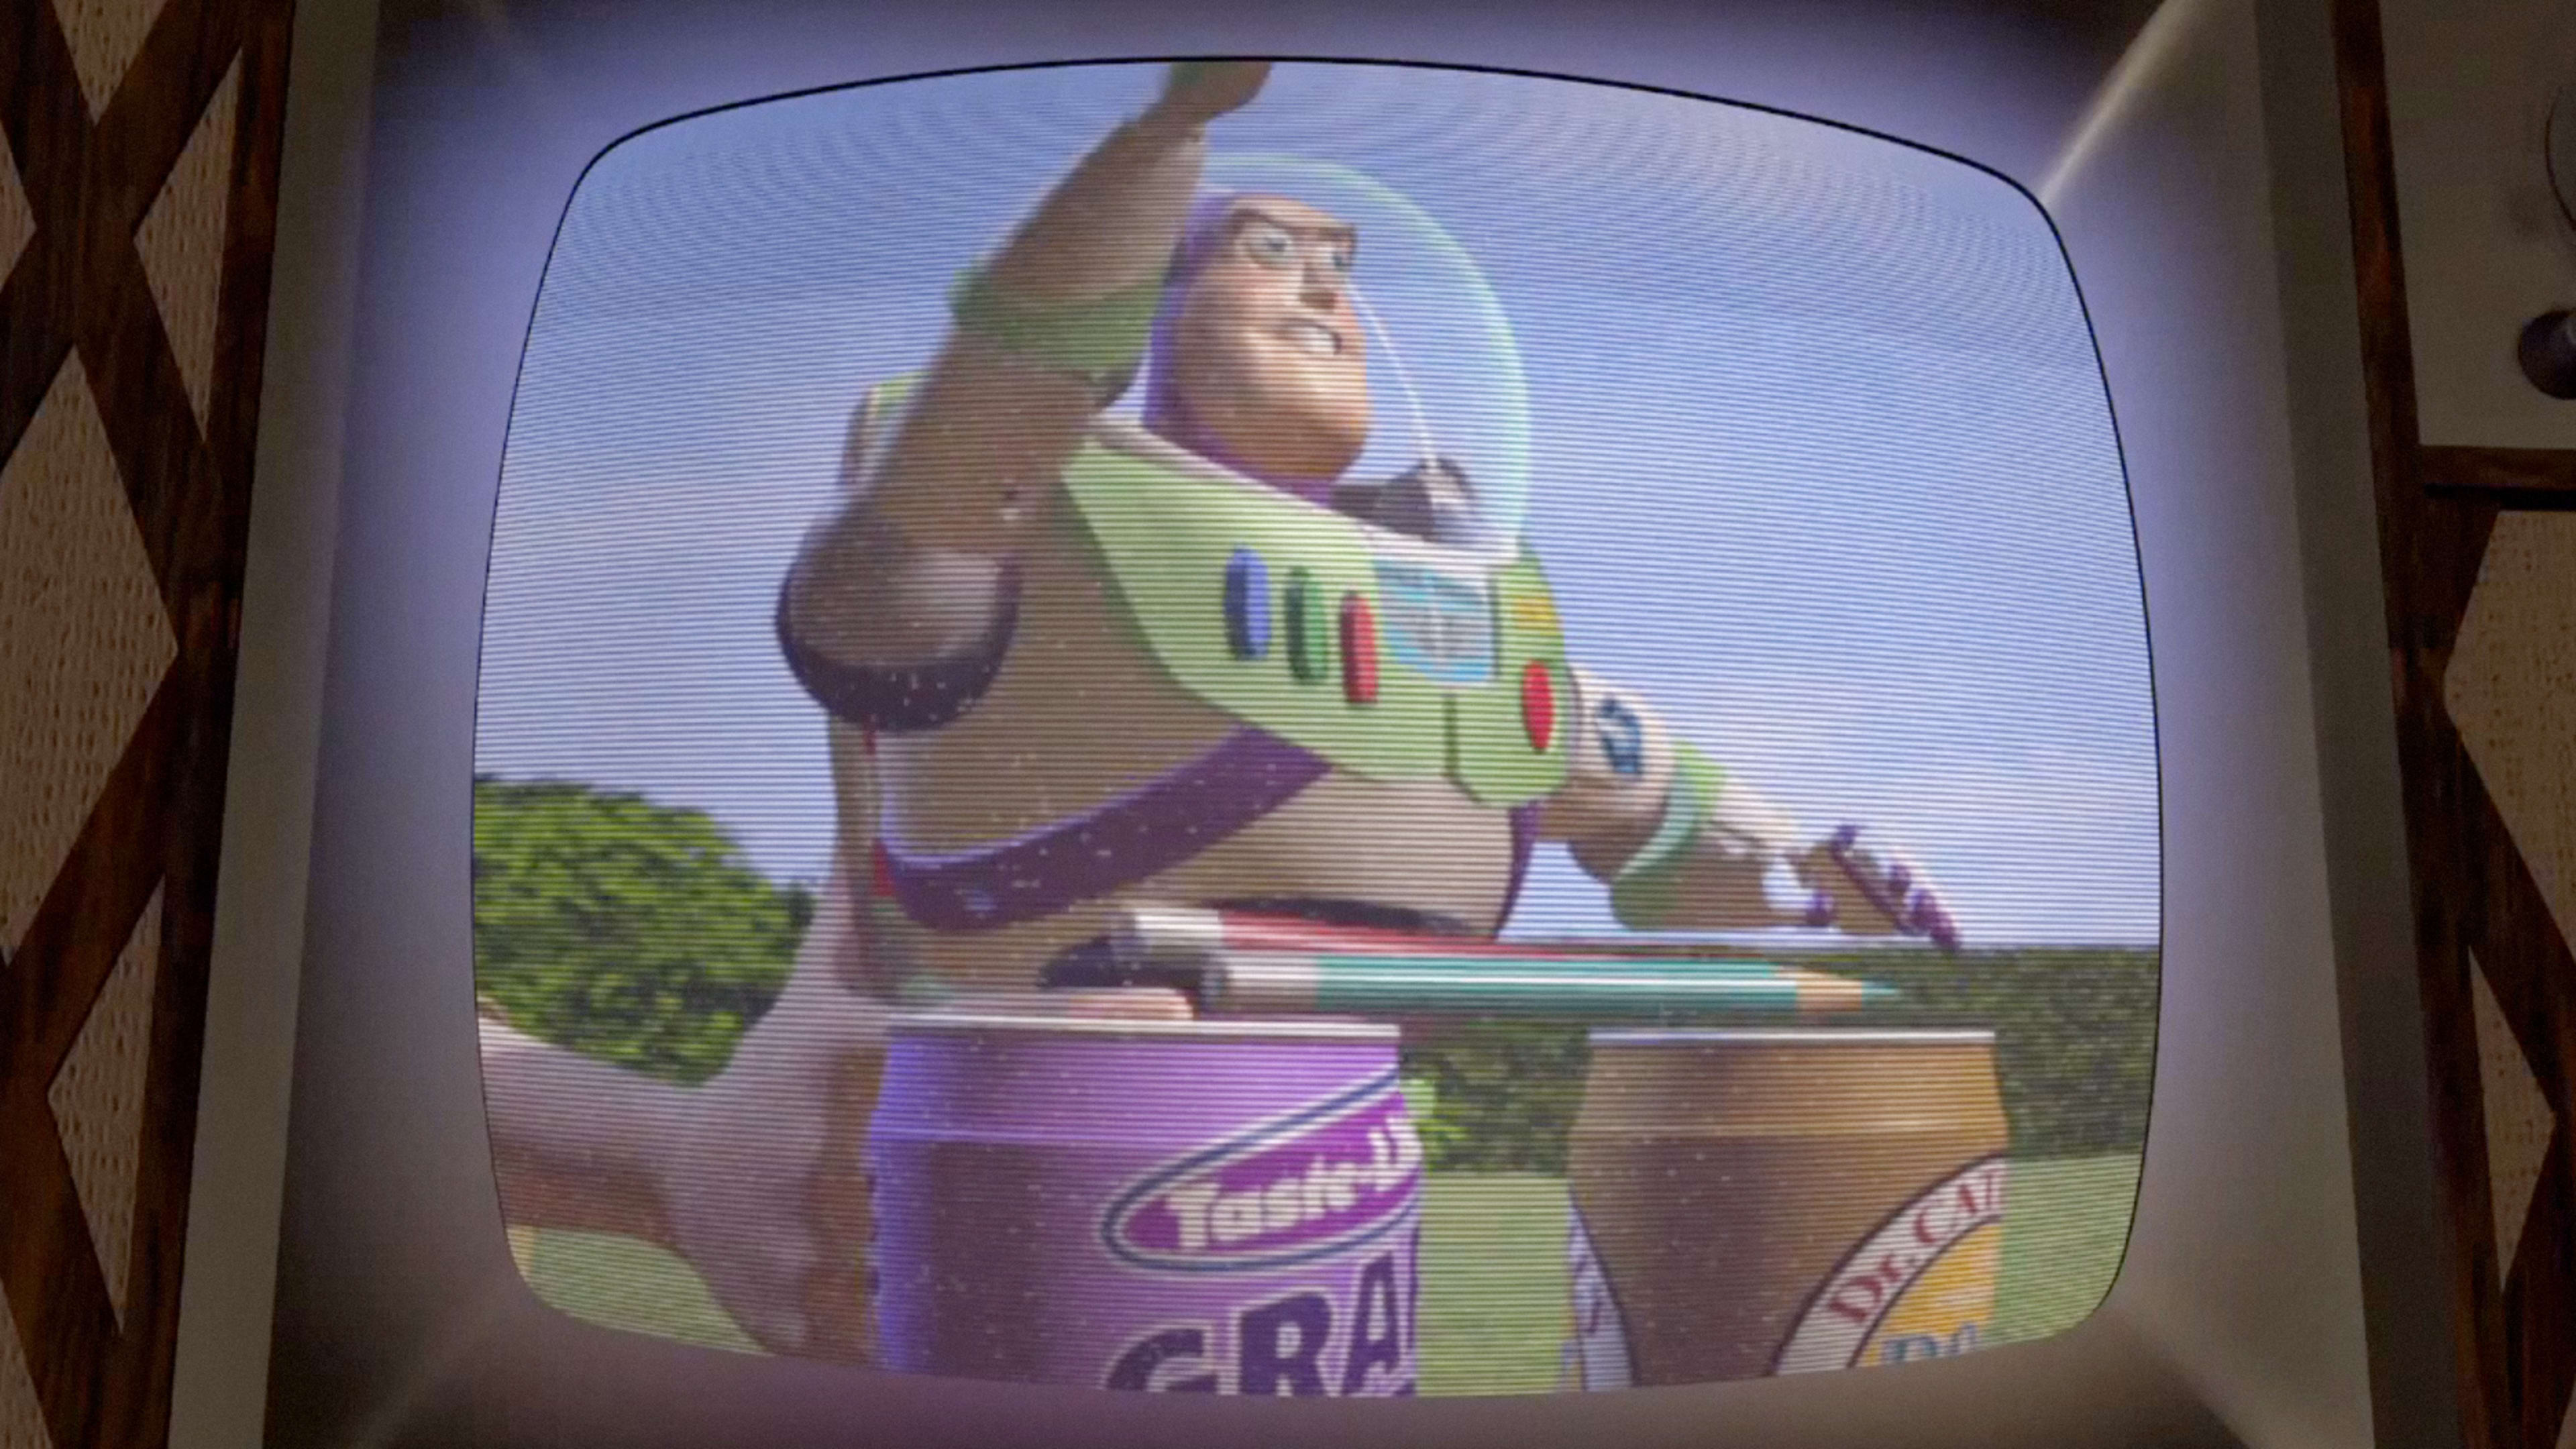 Can You Find All The Easter Eggs In Pixar’s Movie?